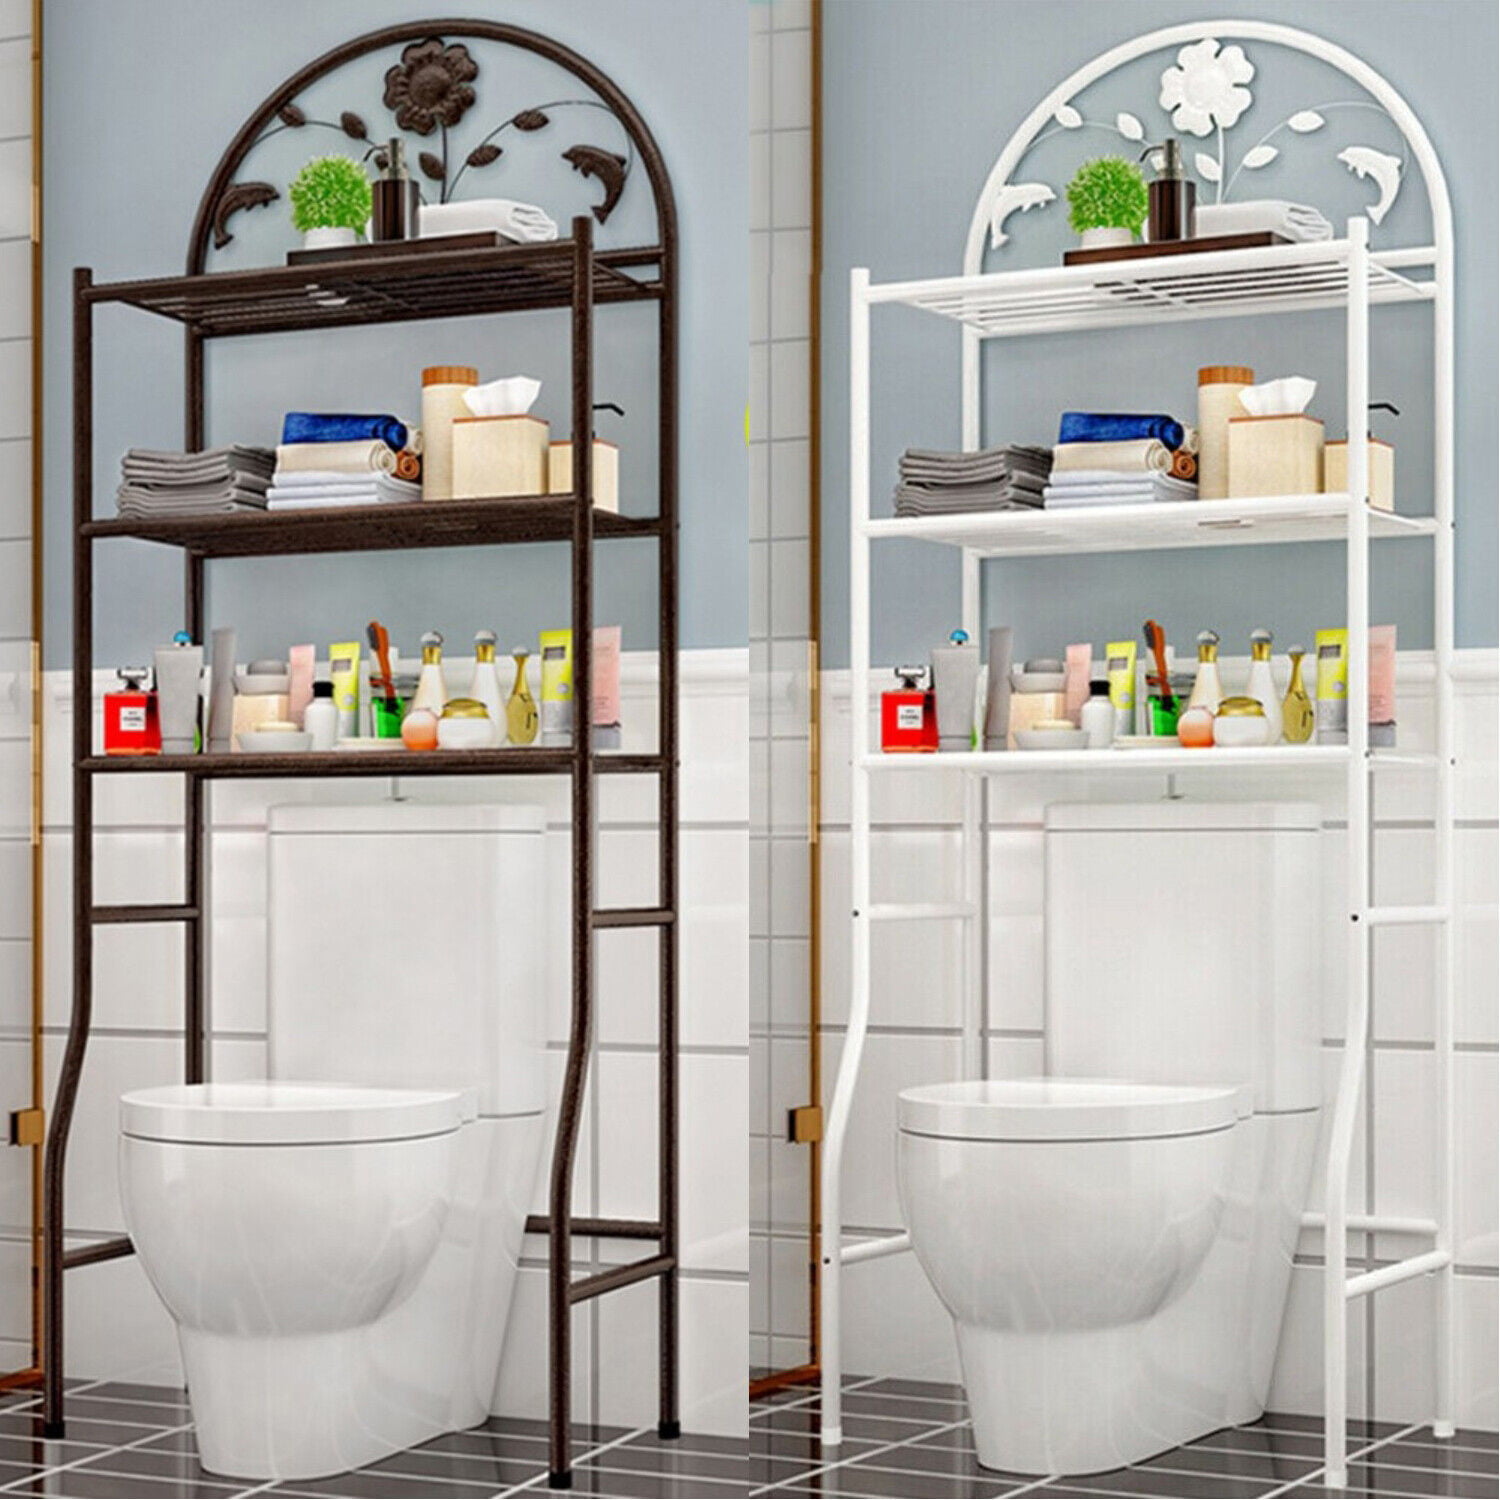 25 in. W 3-Shelf Over-The-Toilet Freestanding Storage Organizer Toilet Rack  HYWY-63999BN - The Home Depot